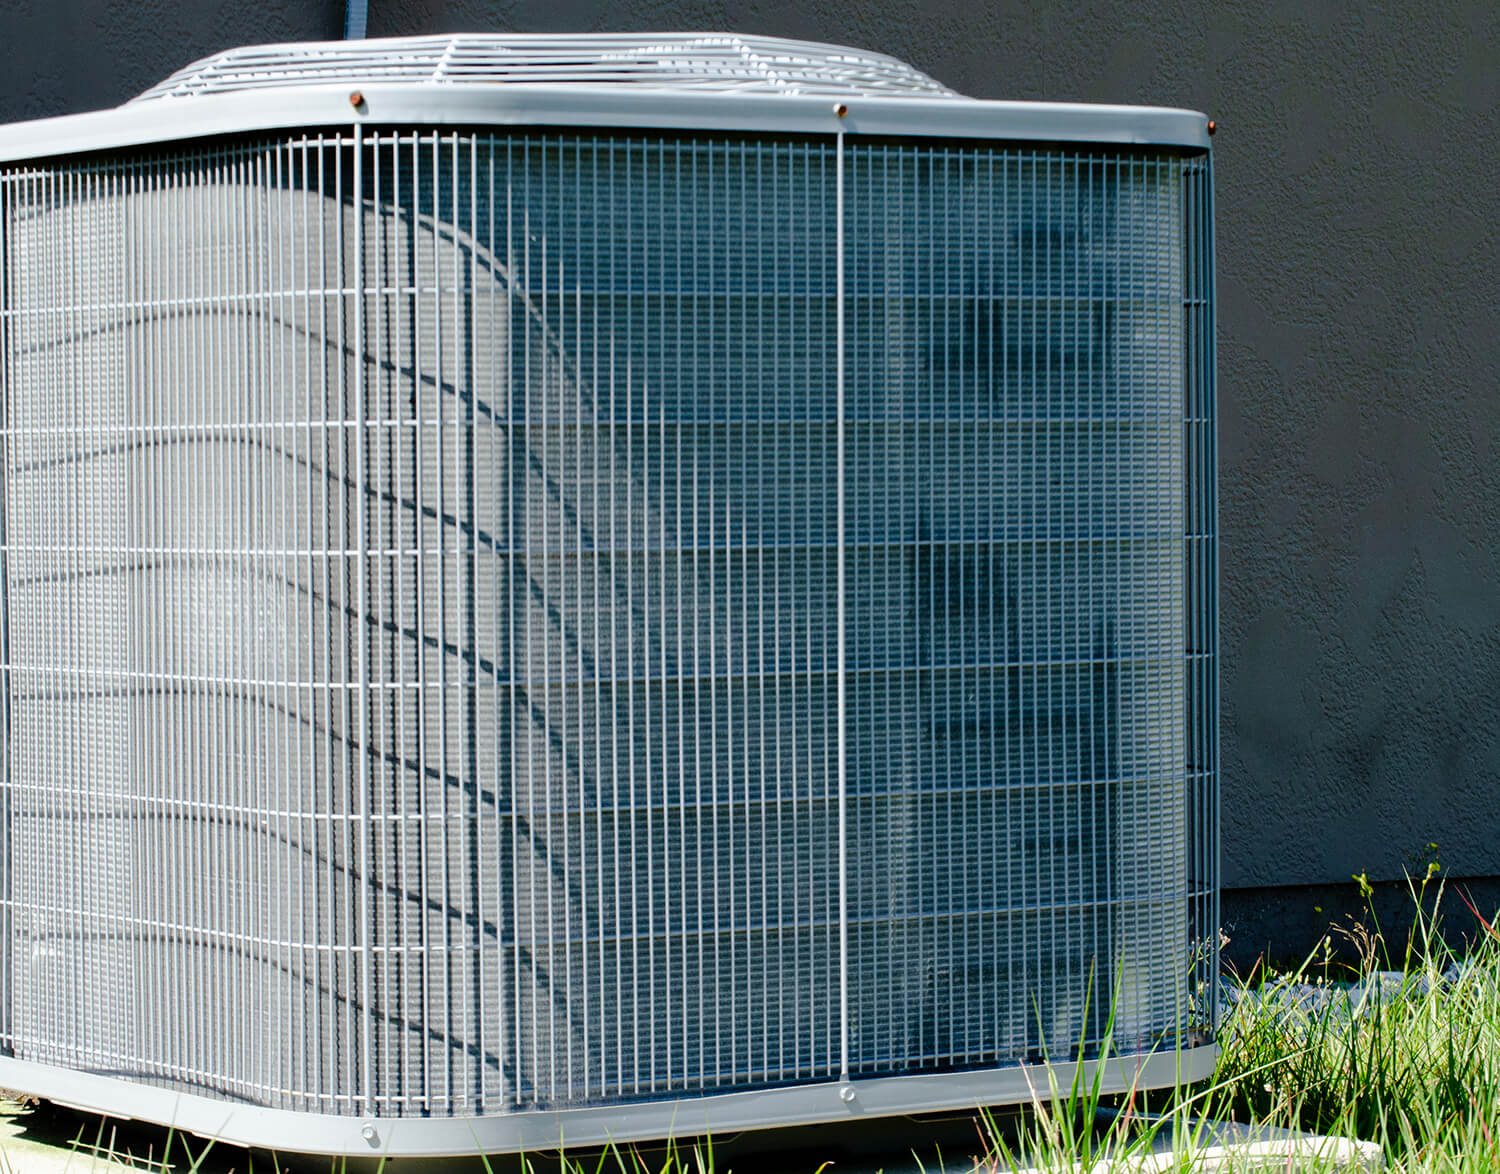 Keeping your apartment cool is like trying to keep a sandwich cool on a hike